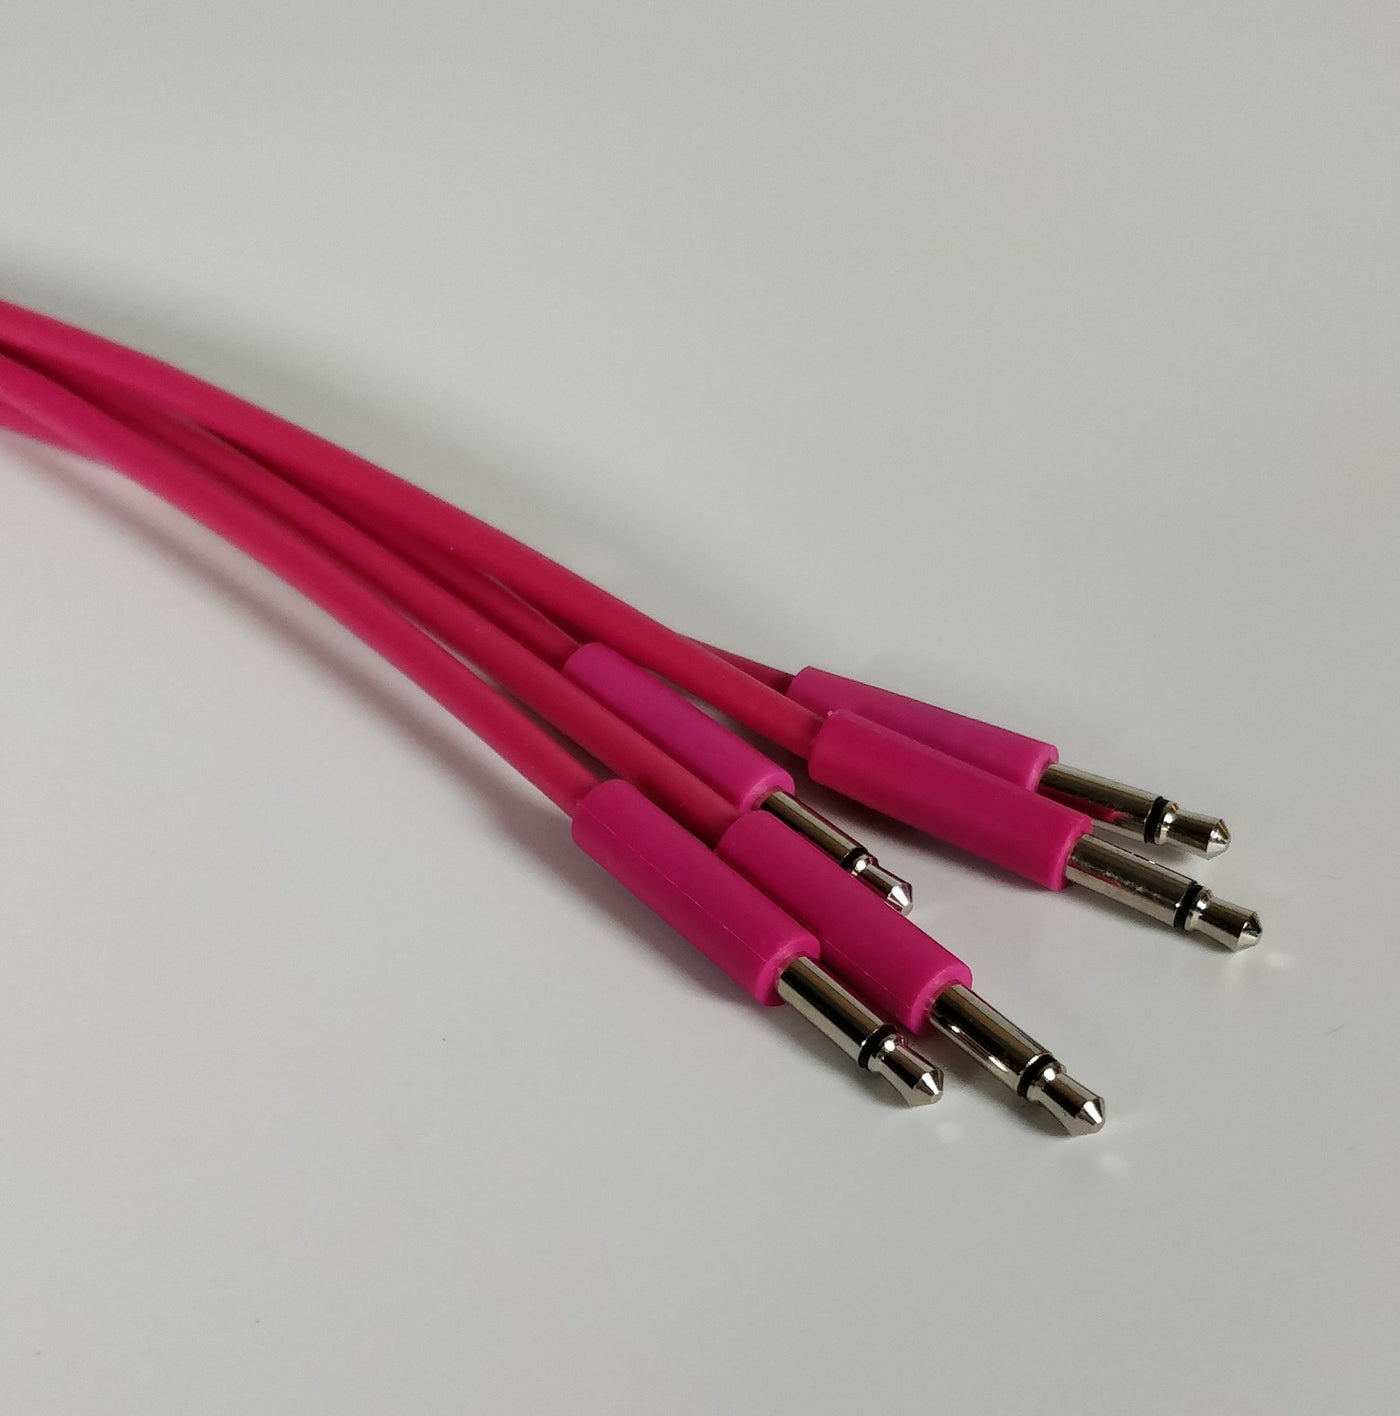 Skinny Patch Cables (6") - Pack of 5